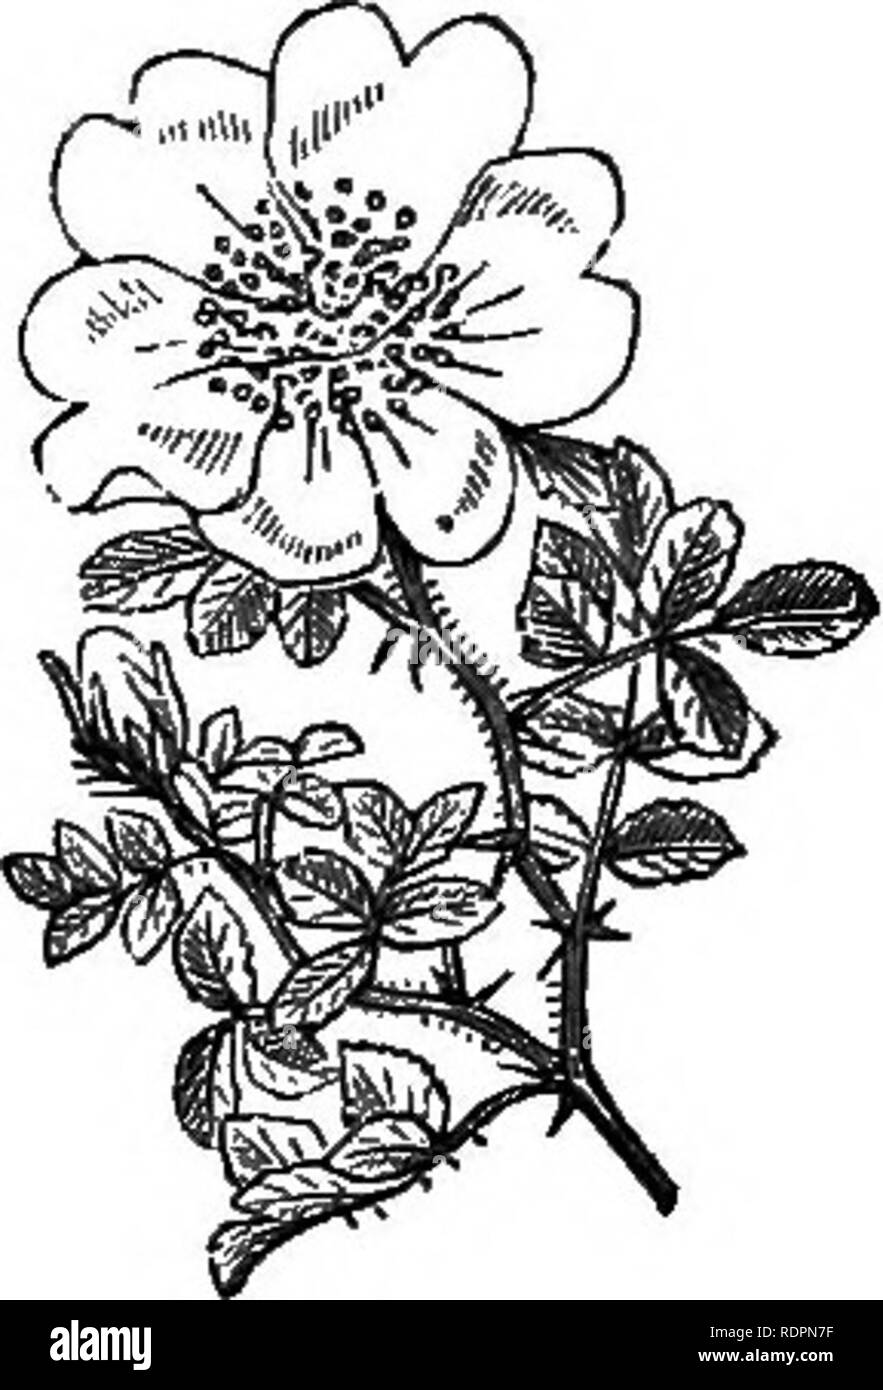 . My garden, its plan and culture together with a general description of its geology, botany, and natural history. Gardening. Fig. 562.—White Noisette Rose. Fig. 563.—Yellow Banksian Rose. Fig. 563 a.—Macartney's Rose. varieties cover extensive surfaces. When they put forth their flowers in bunches with thousands of blossoms, there is hardly anything more beautiful to be seen. In this country they are apt to be killed down —even when the stems are as thick as the wrist—during severe winters. The Macartney roses {R. bracteata, fig. 563 a) produce a fine eff'ect against a wall in summer, when th Stock Photo